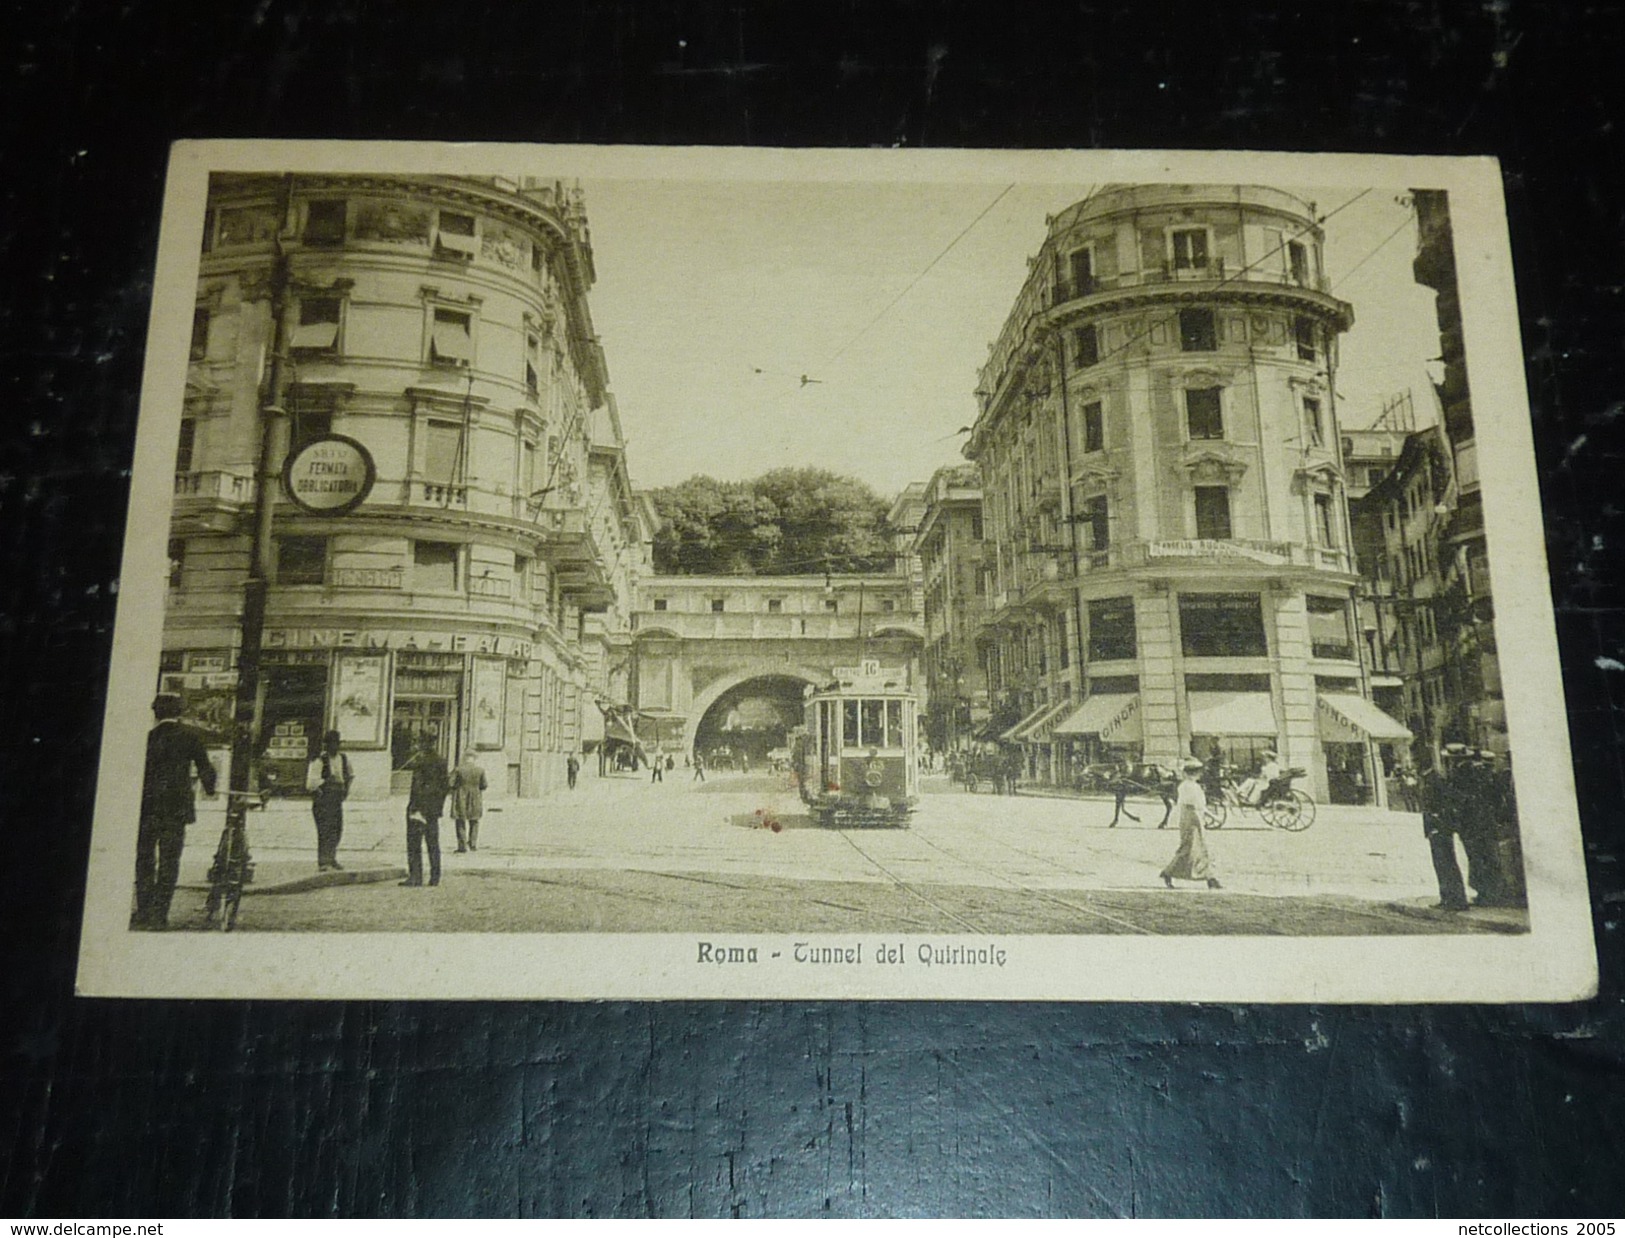 ITALIE ROME ROMA LOT DE 37 CARTES POSTALES TRAMWAY RUE MONUMENT FONTAINE TOUTES DIFFERENTES - EUROPE ITALE (S) - Collections & Lots